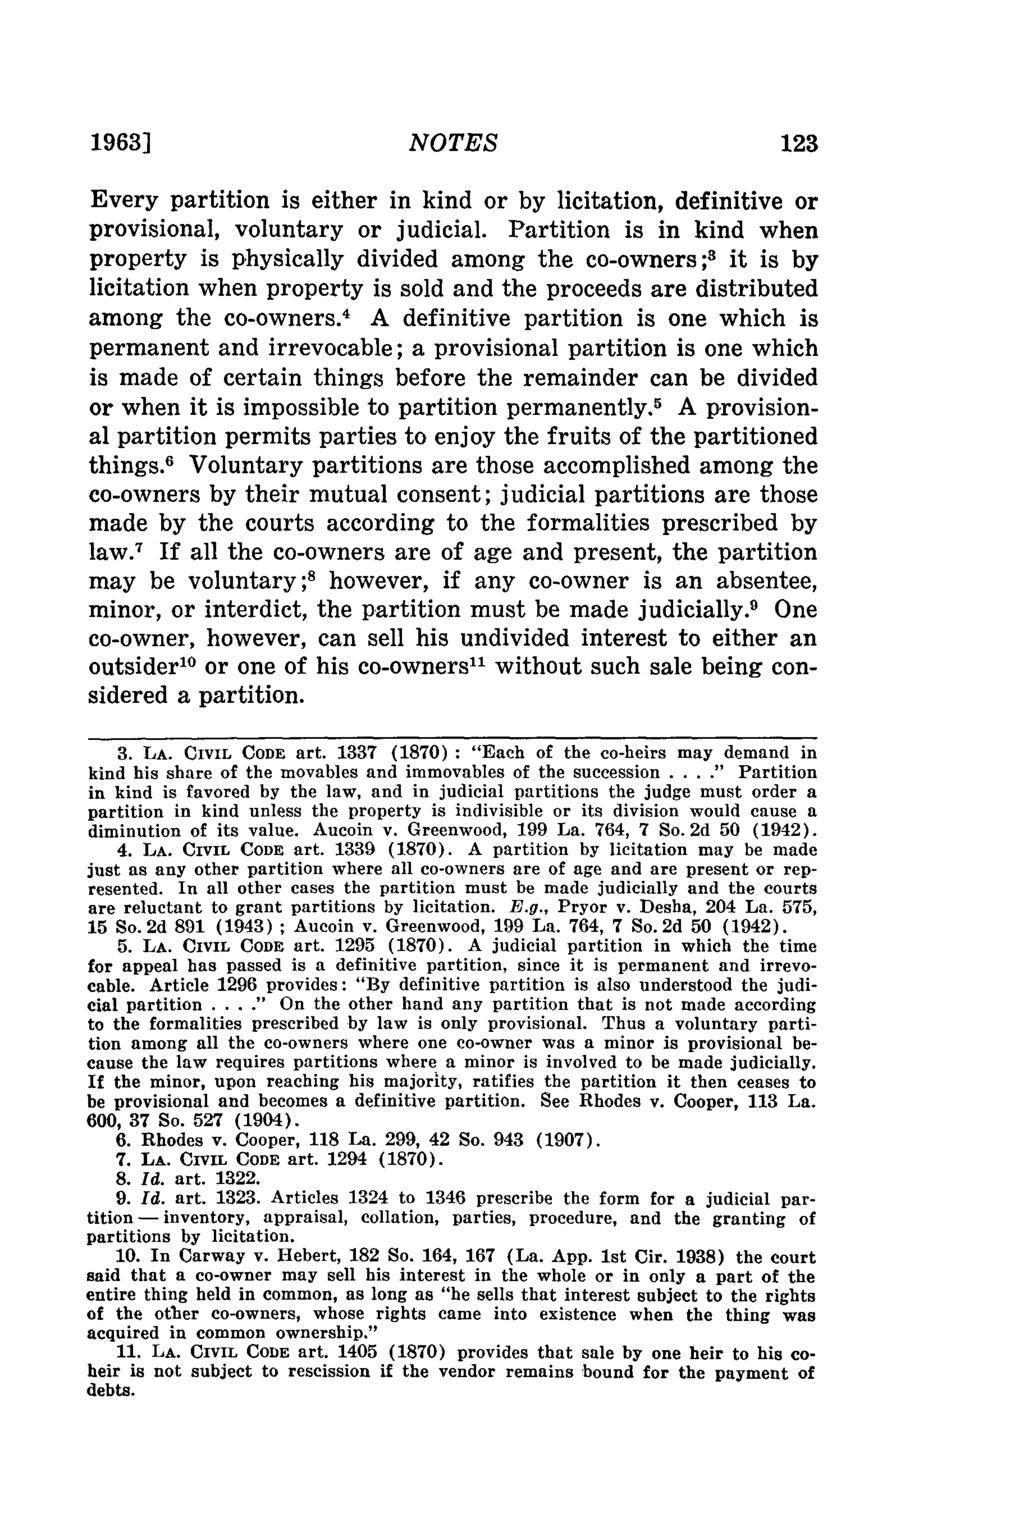 1963] NOTES Every partition is either in kind or by licitation, definitive or provisional, voluntary or judicial.